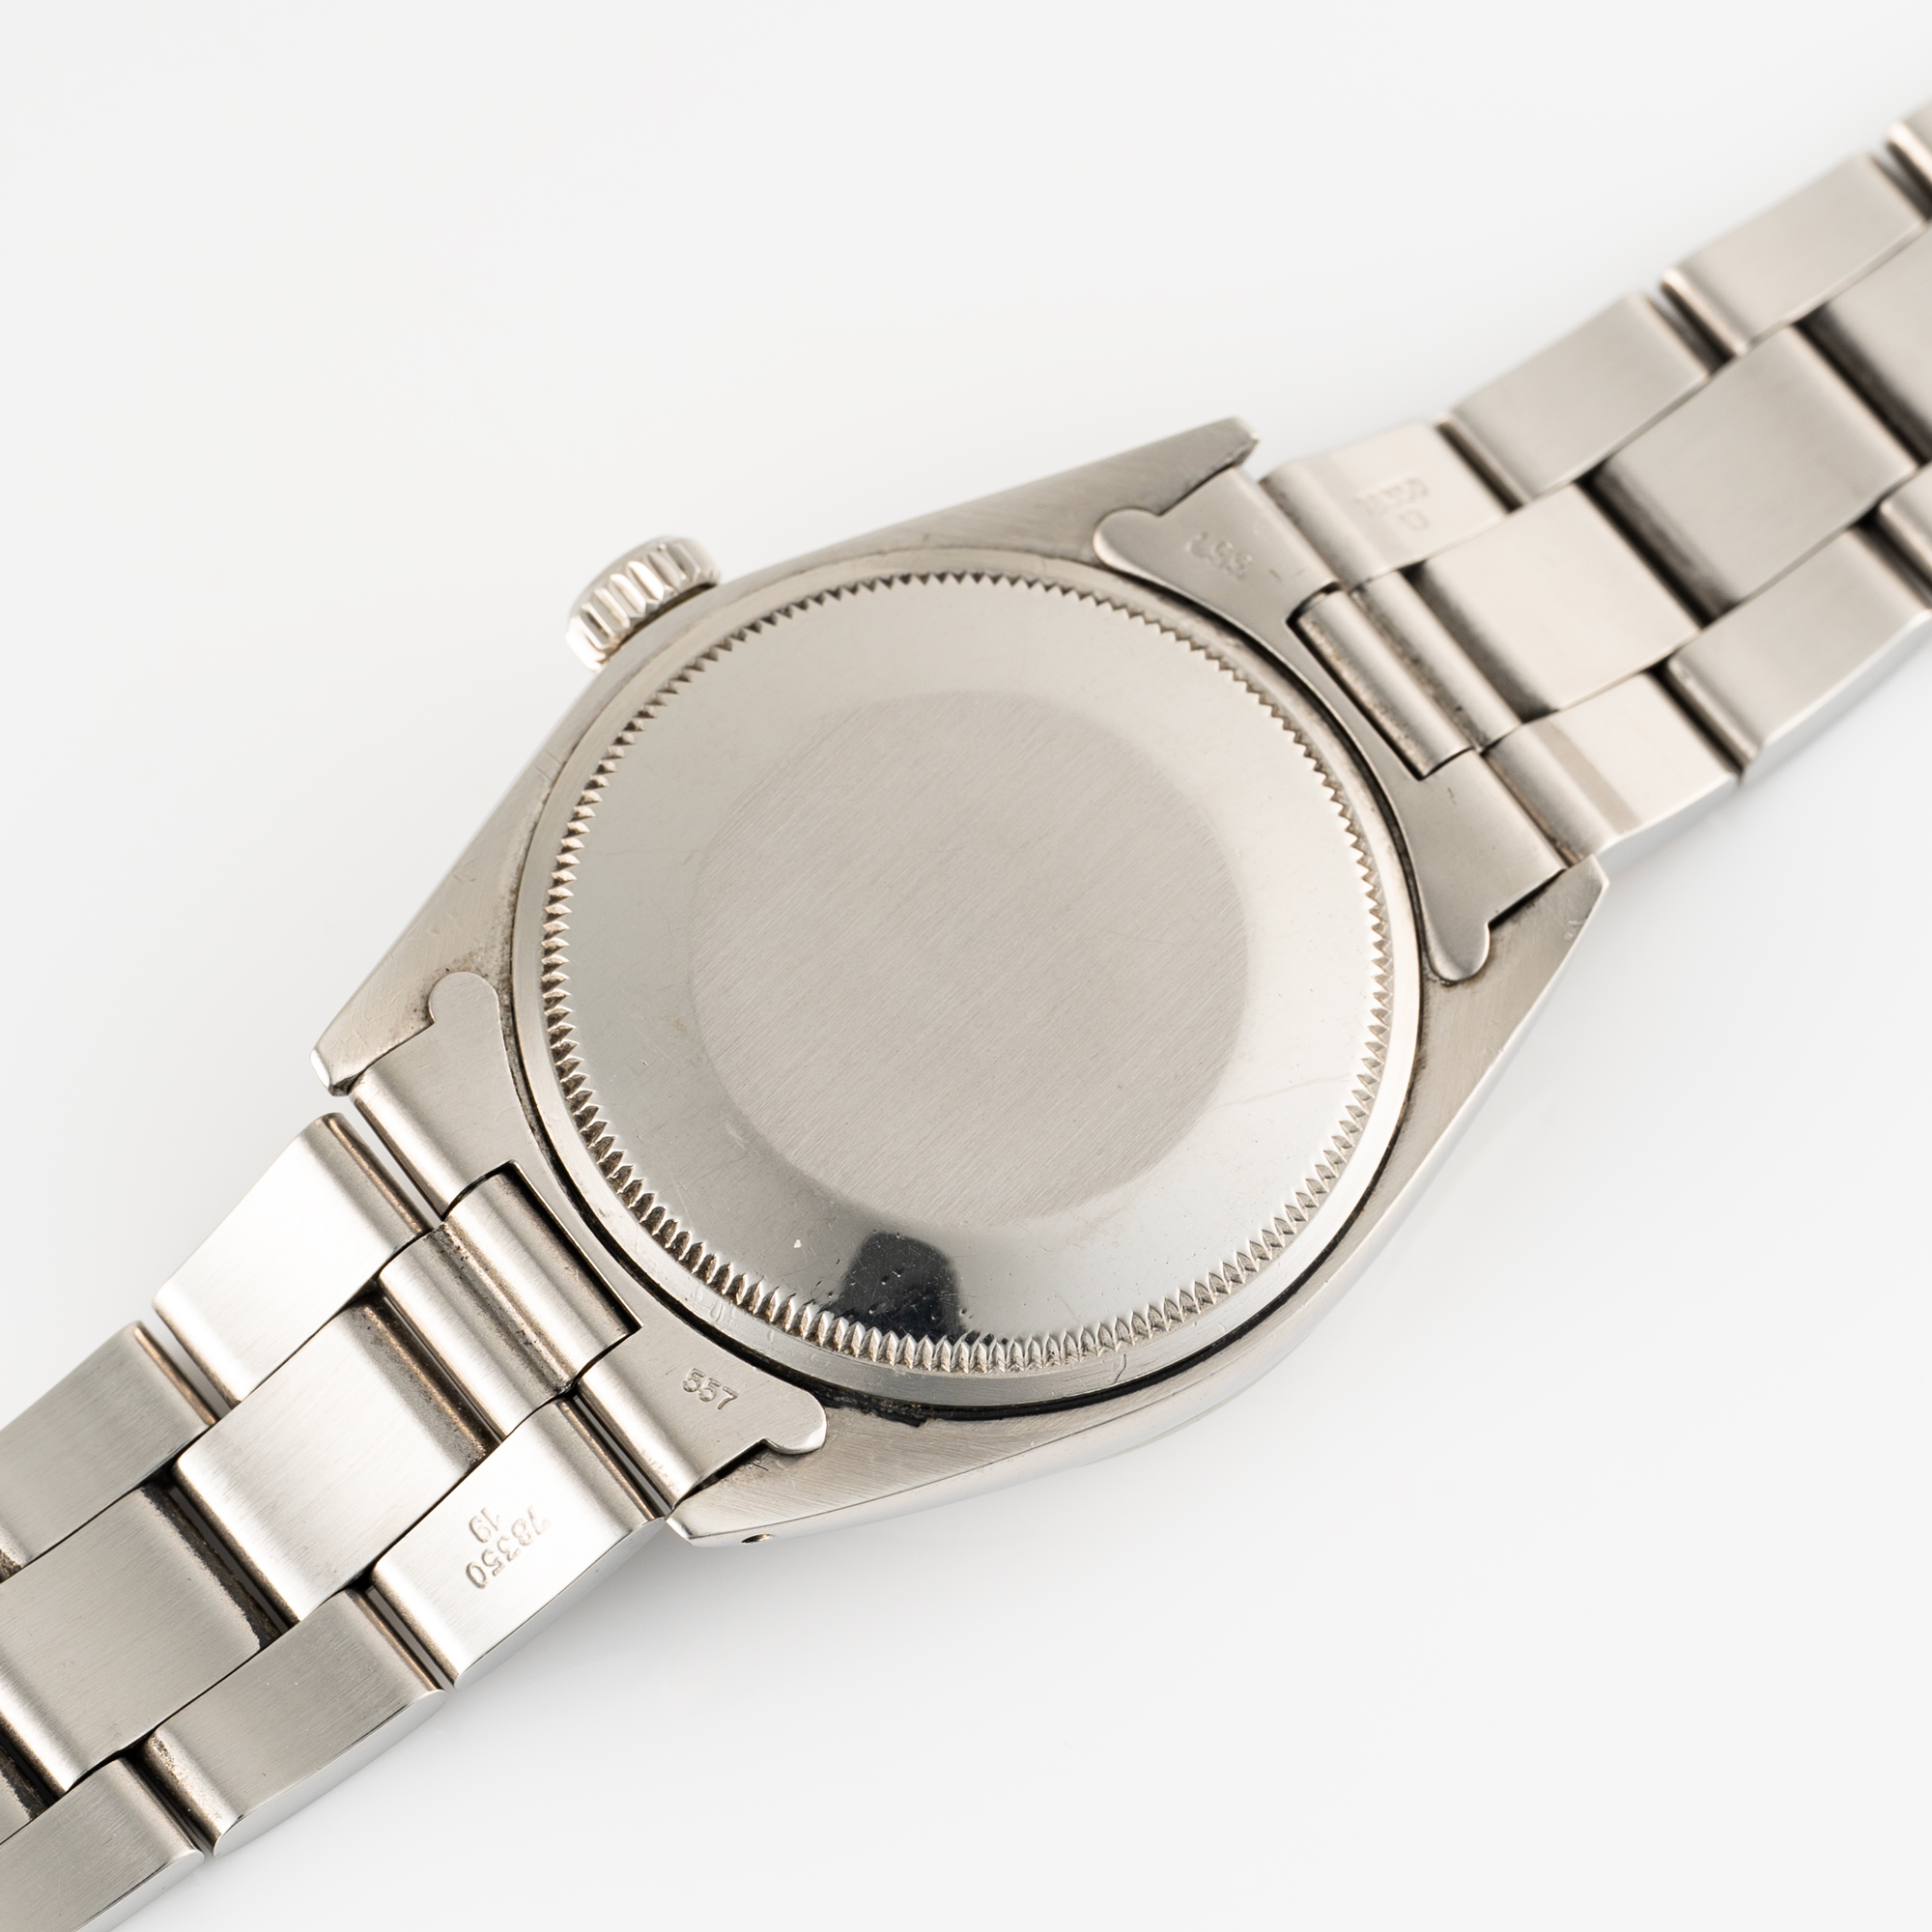 A GENTLEMAN'S SIZE STAINLESS STEEL ROLEX OYSTER PERPETUAL DATE WRIST WATCH CIRCA 1972, REF. 1500 - Image 7 of 8